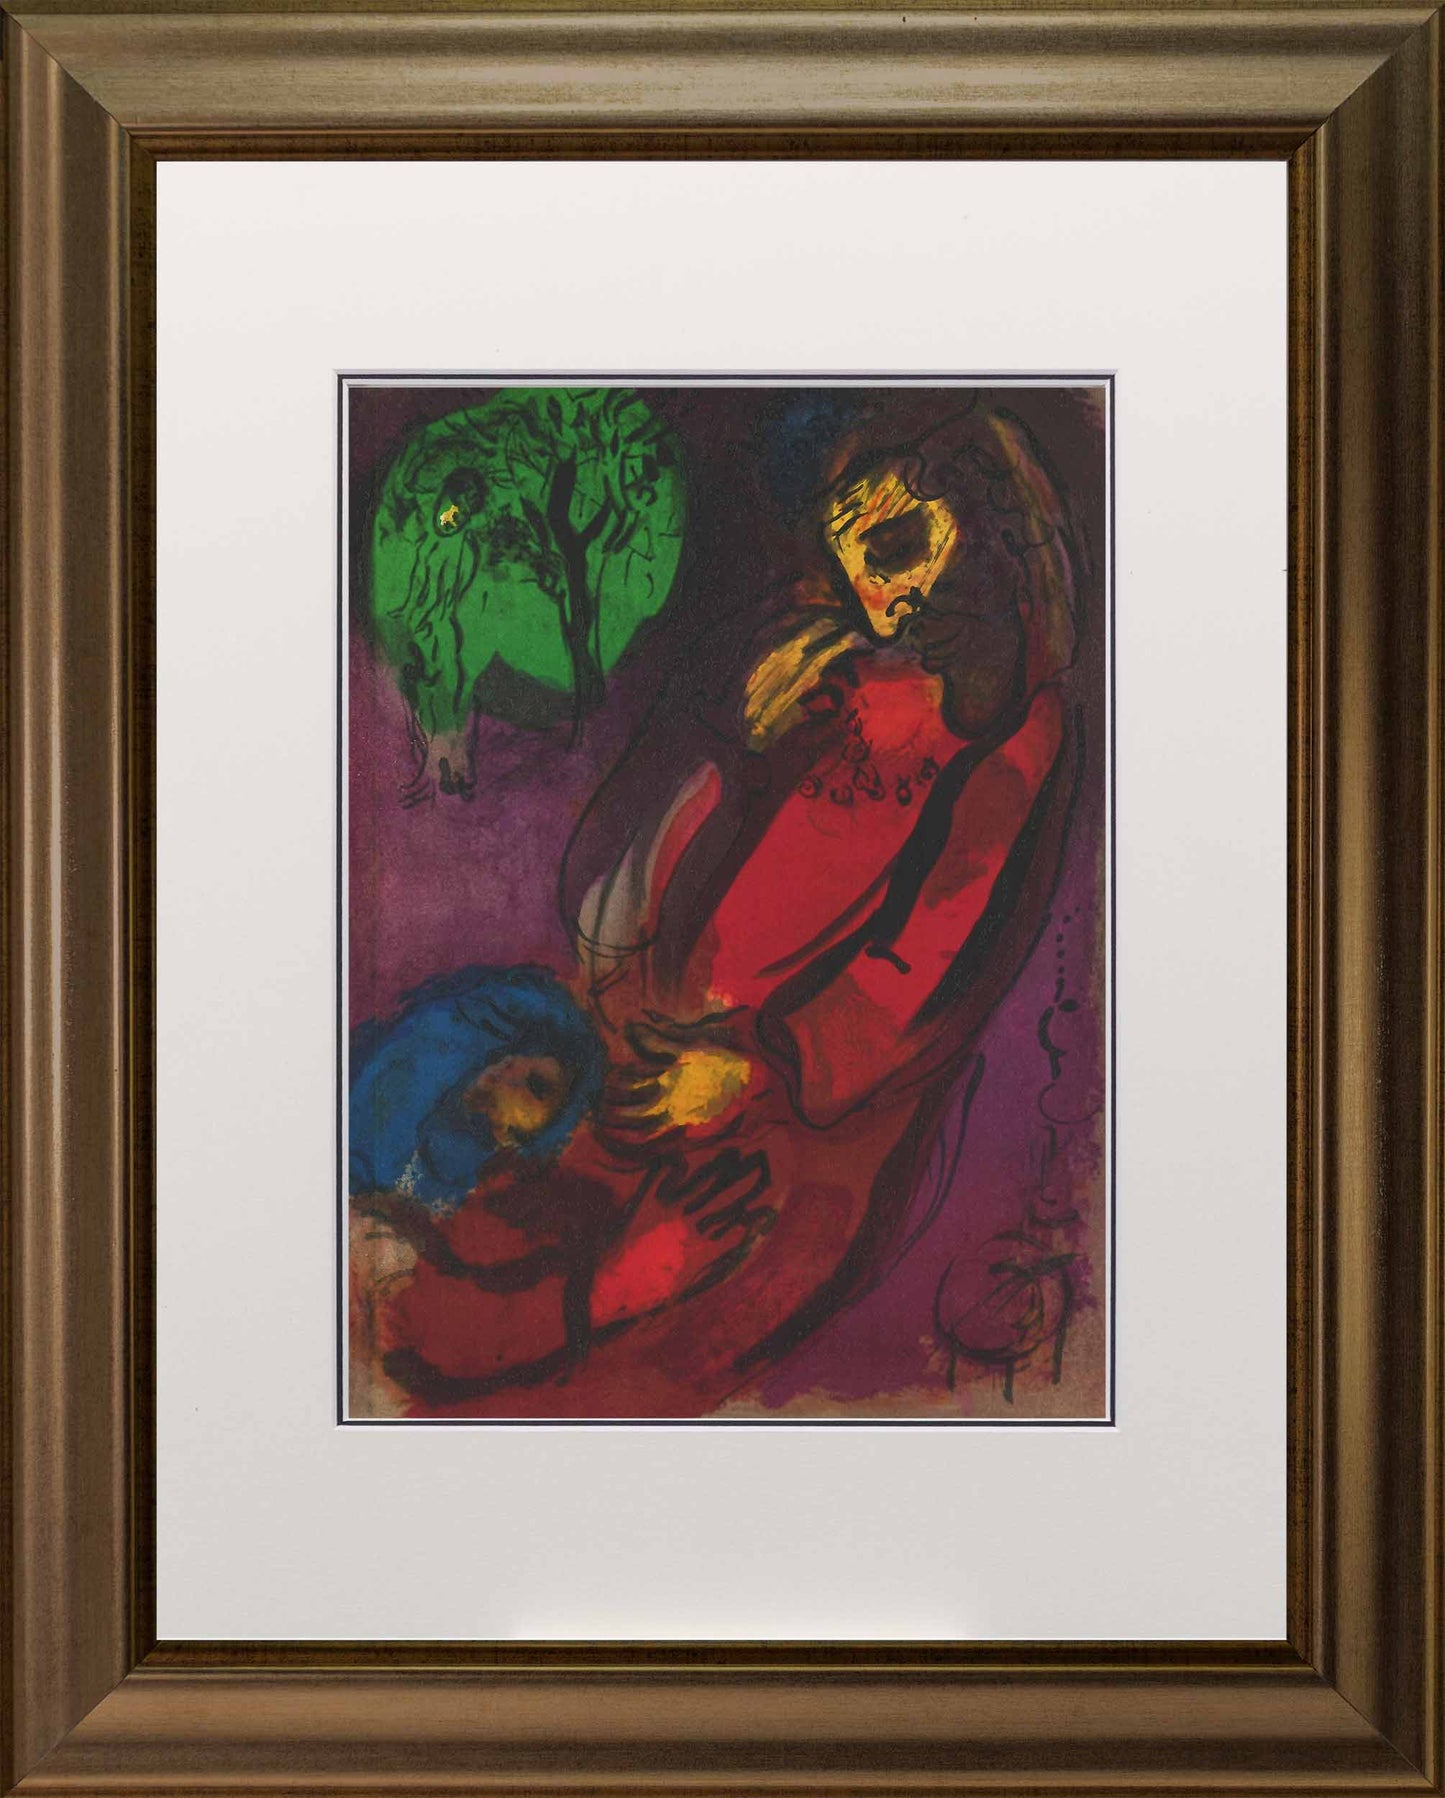 Marc Chagall David lithograph Verve – the bible frame